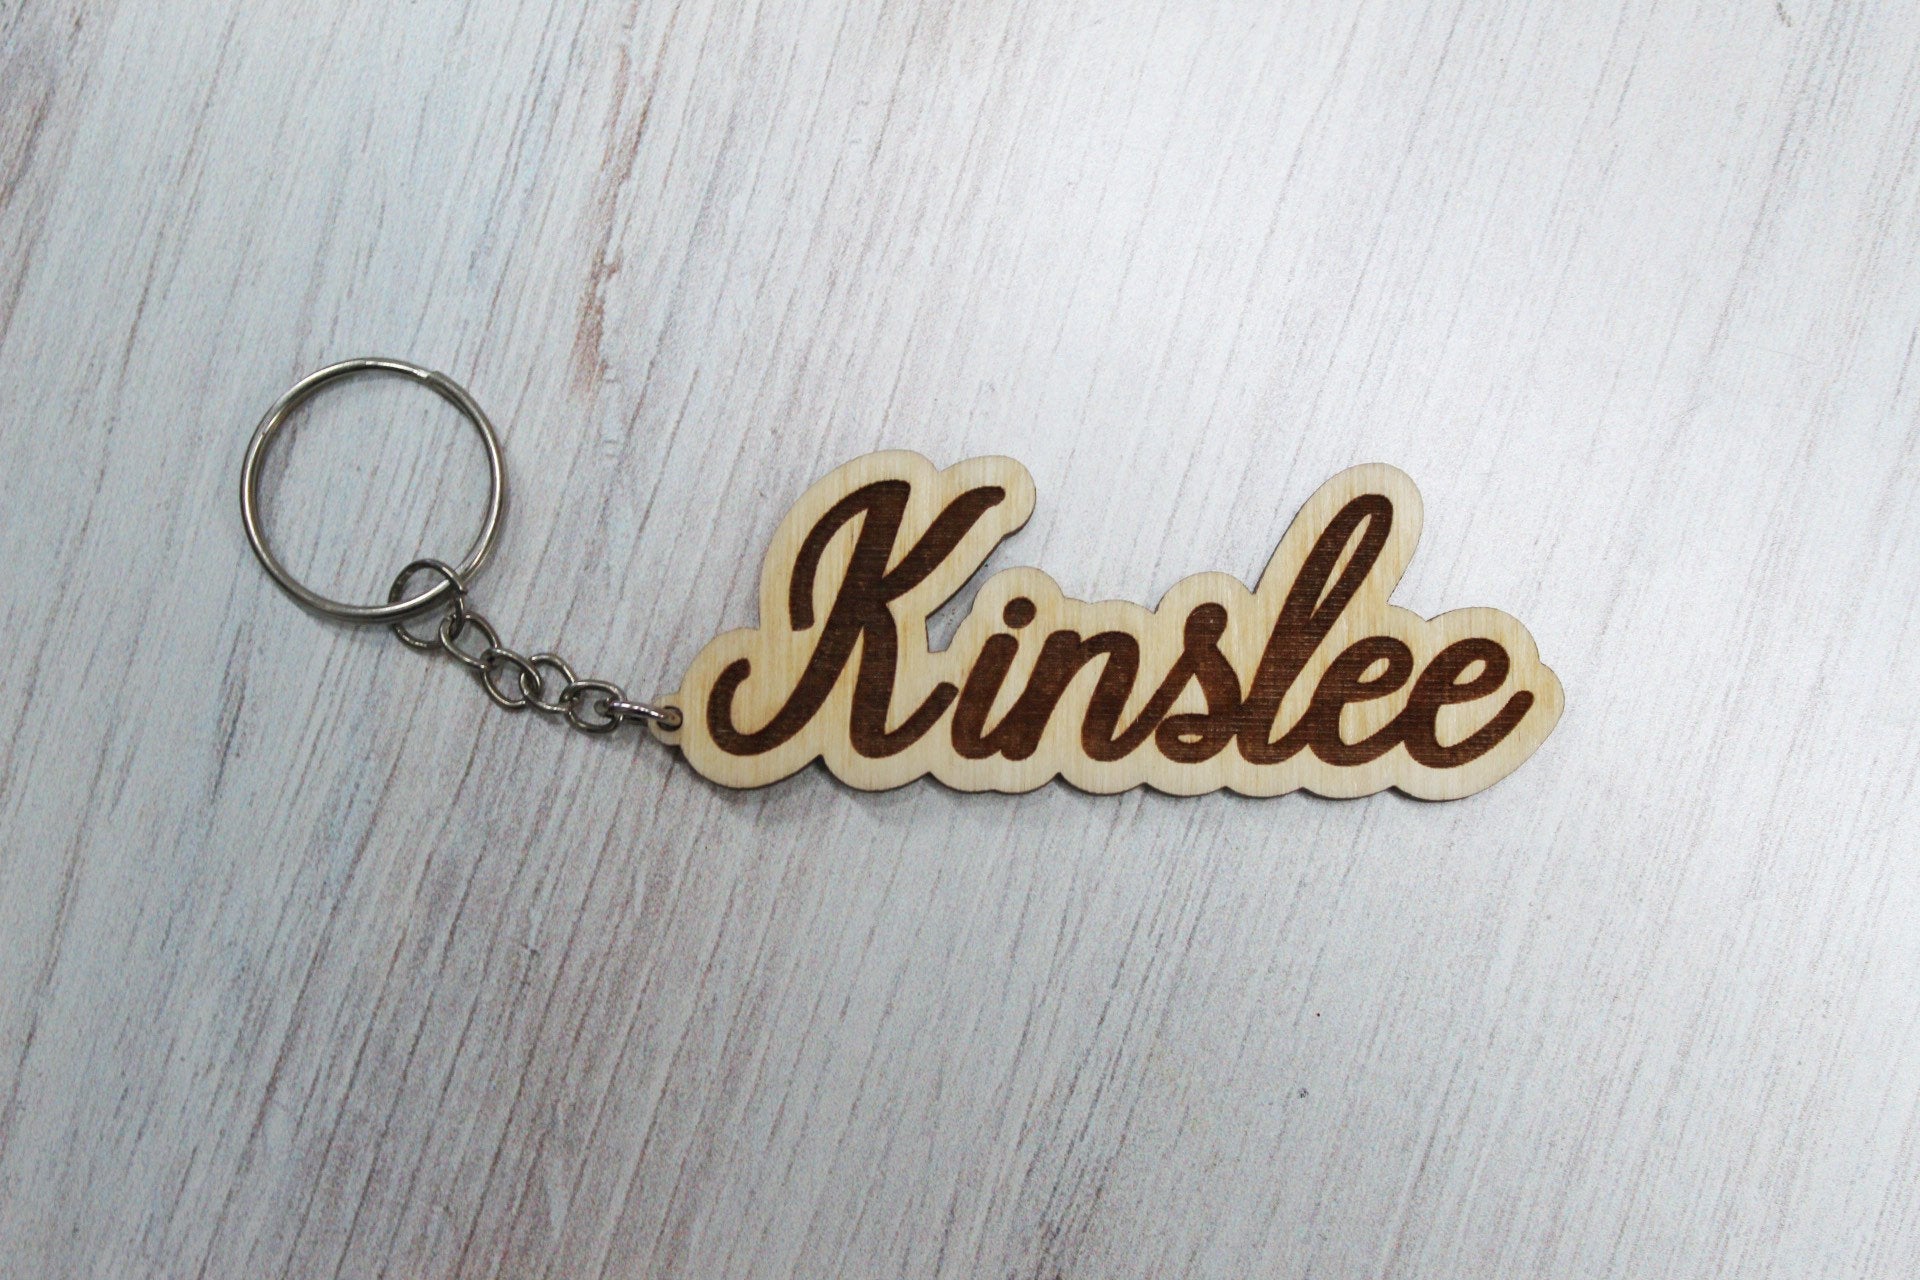 Personalized Wooden Name Keychain Gift For Teens, Engraved Name Key Fob For Car Keys